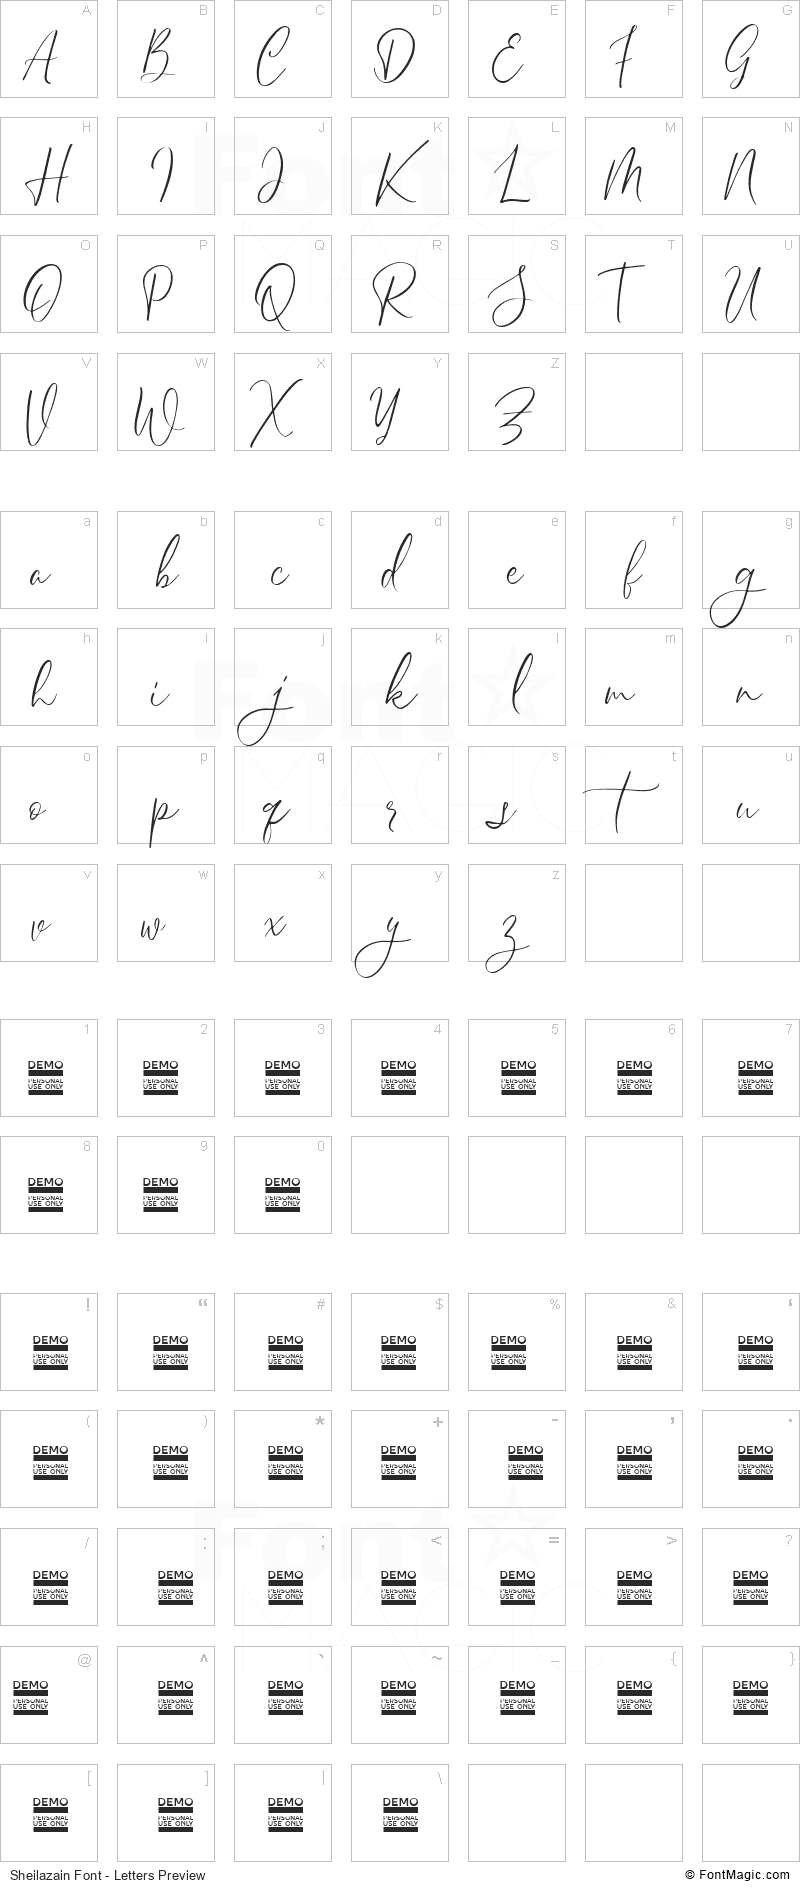 Sheilazain Font - All Latters Preview Chart